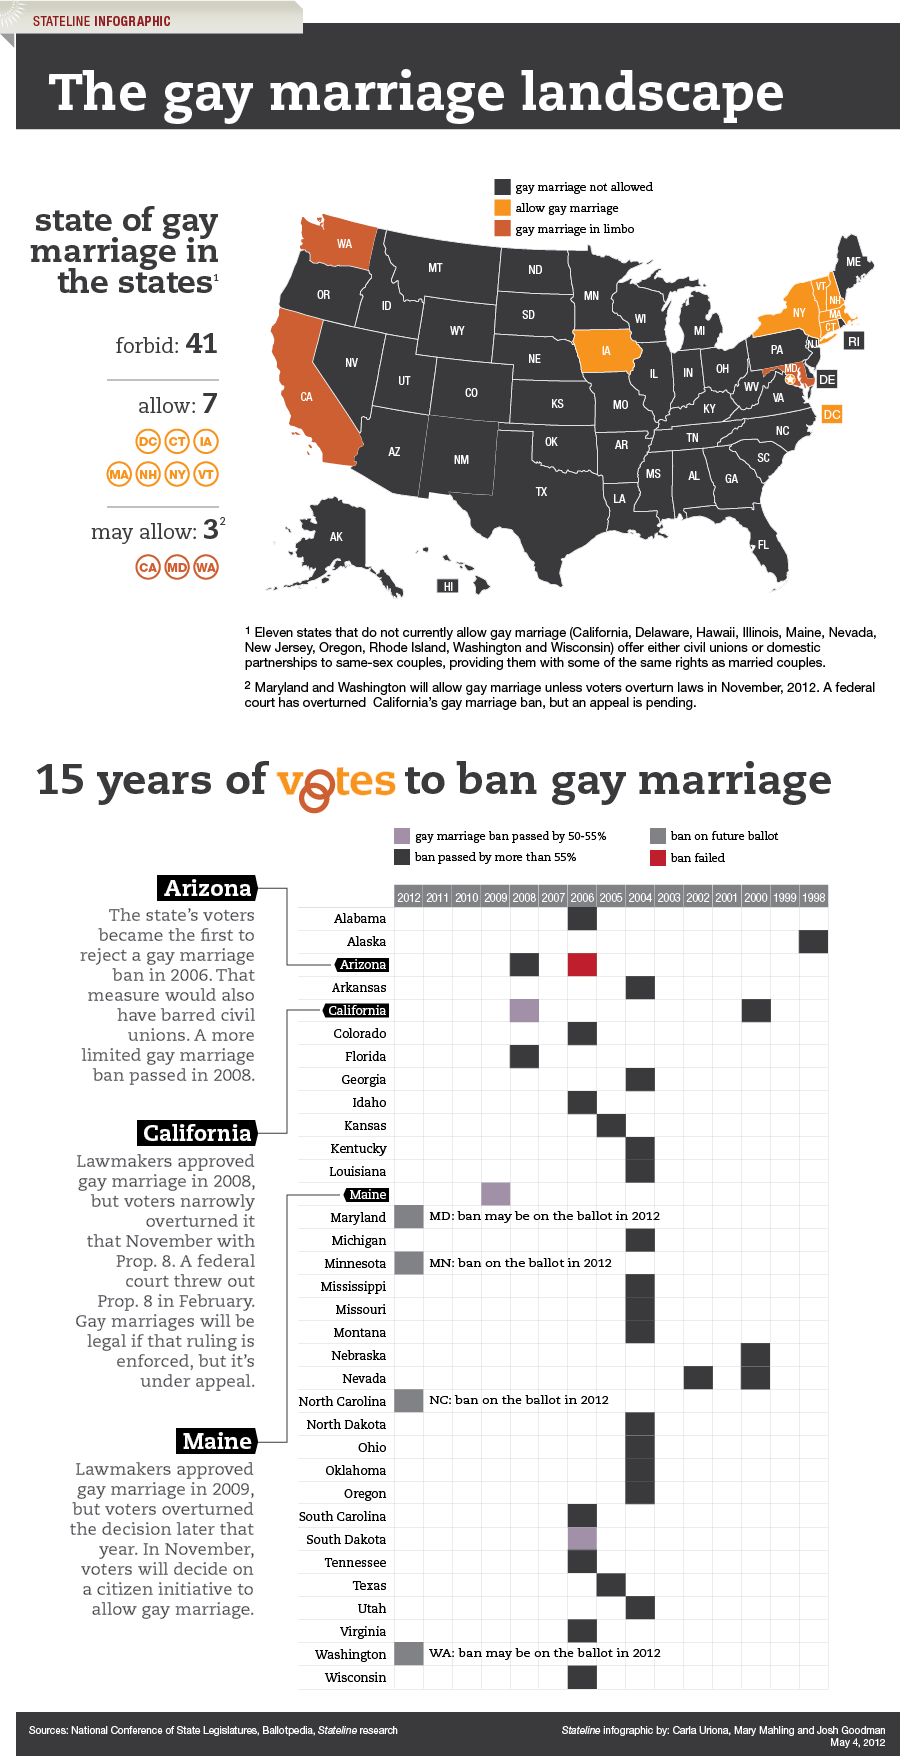 the gay marriage landscape